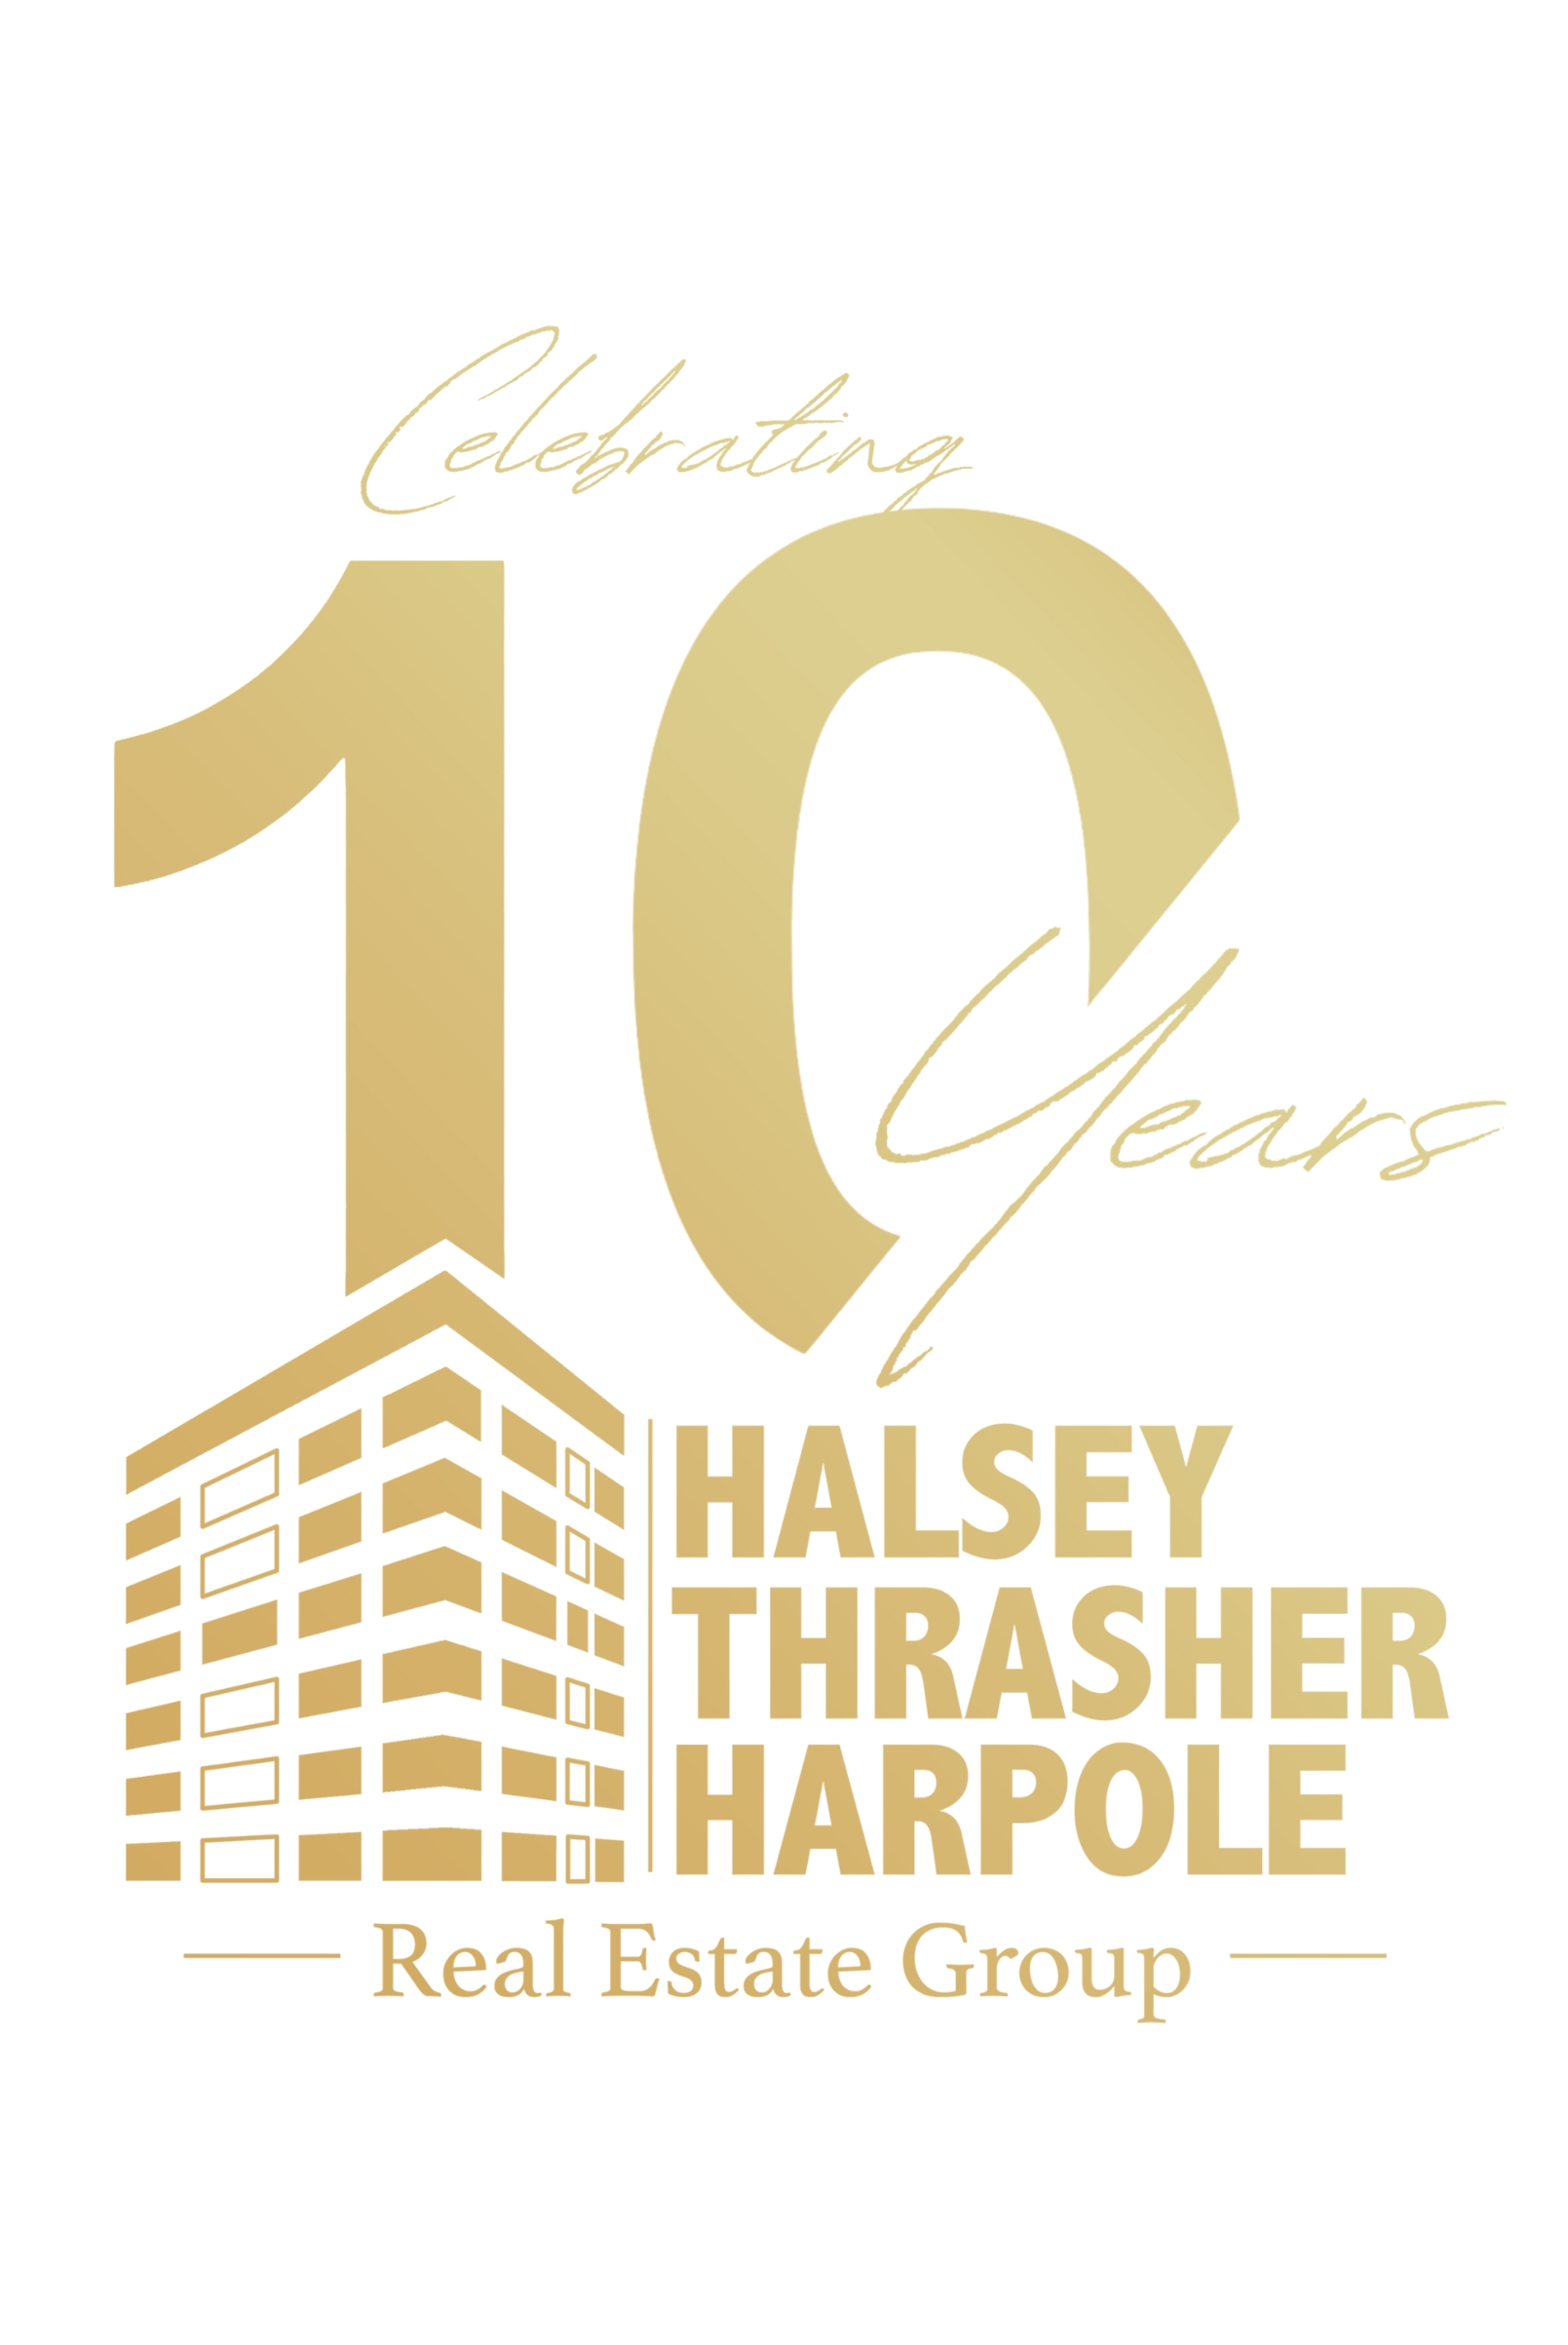 Welcome to Halsey Thrasher Harpole Real Estate Group